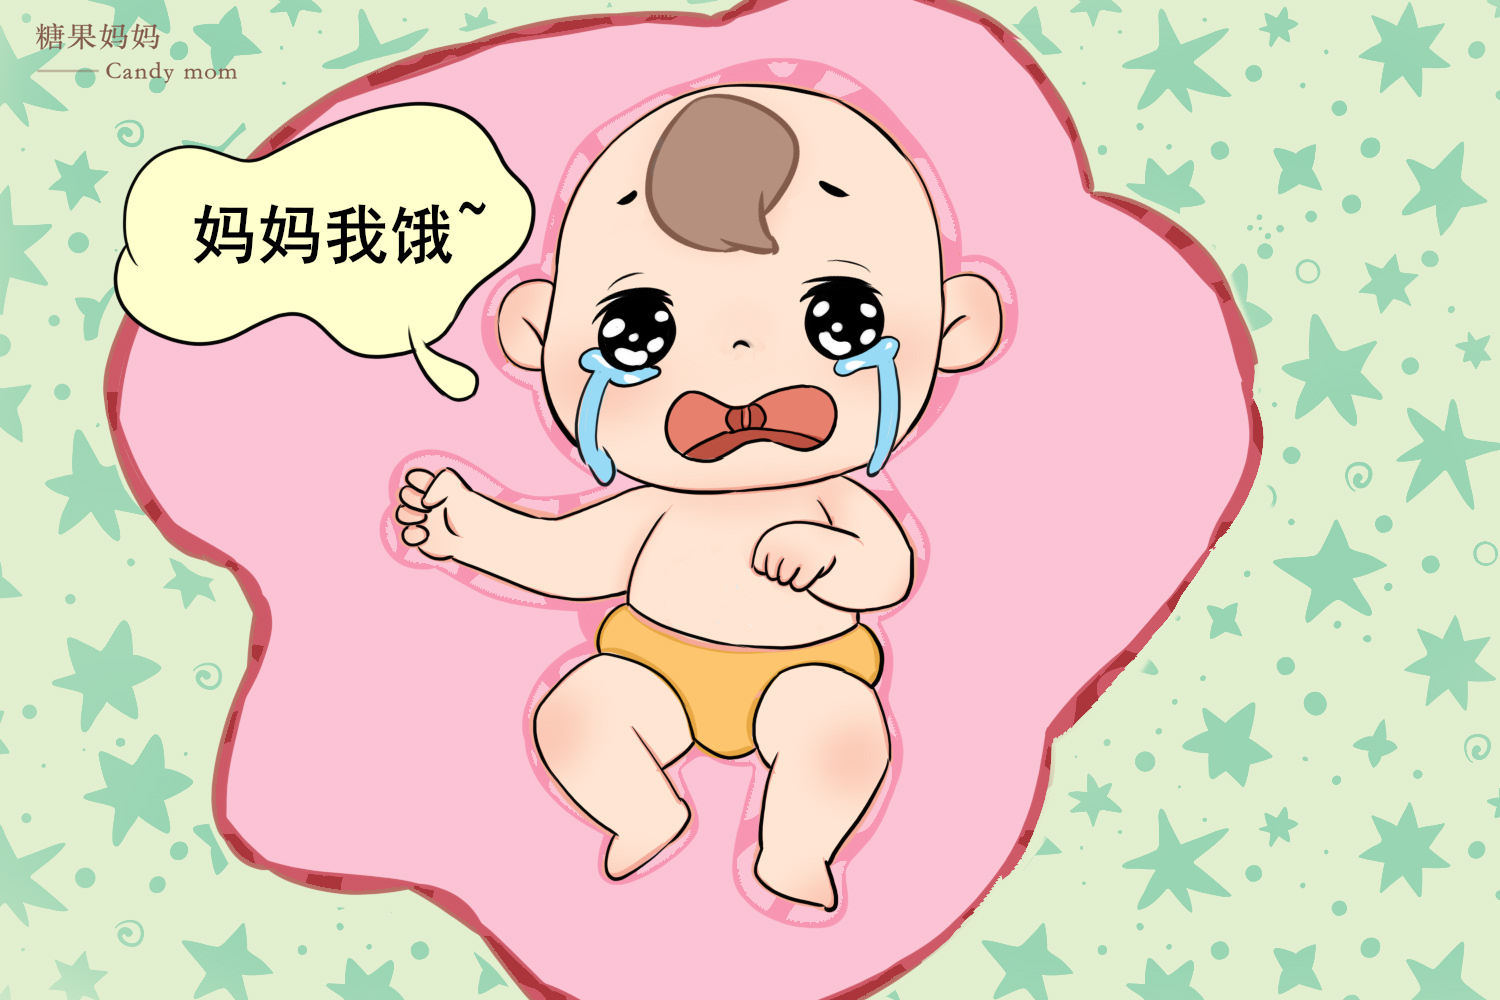 Child Crying Hd Transparent, Crying Mother And Child, Mother And Son ...